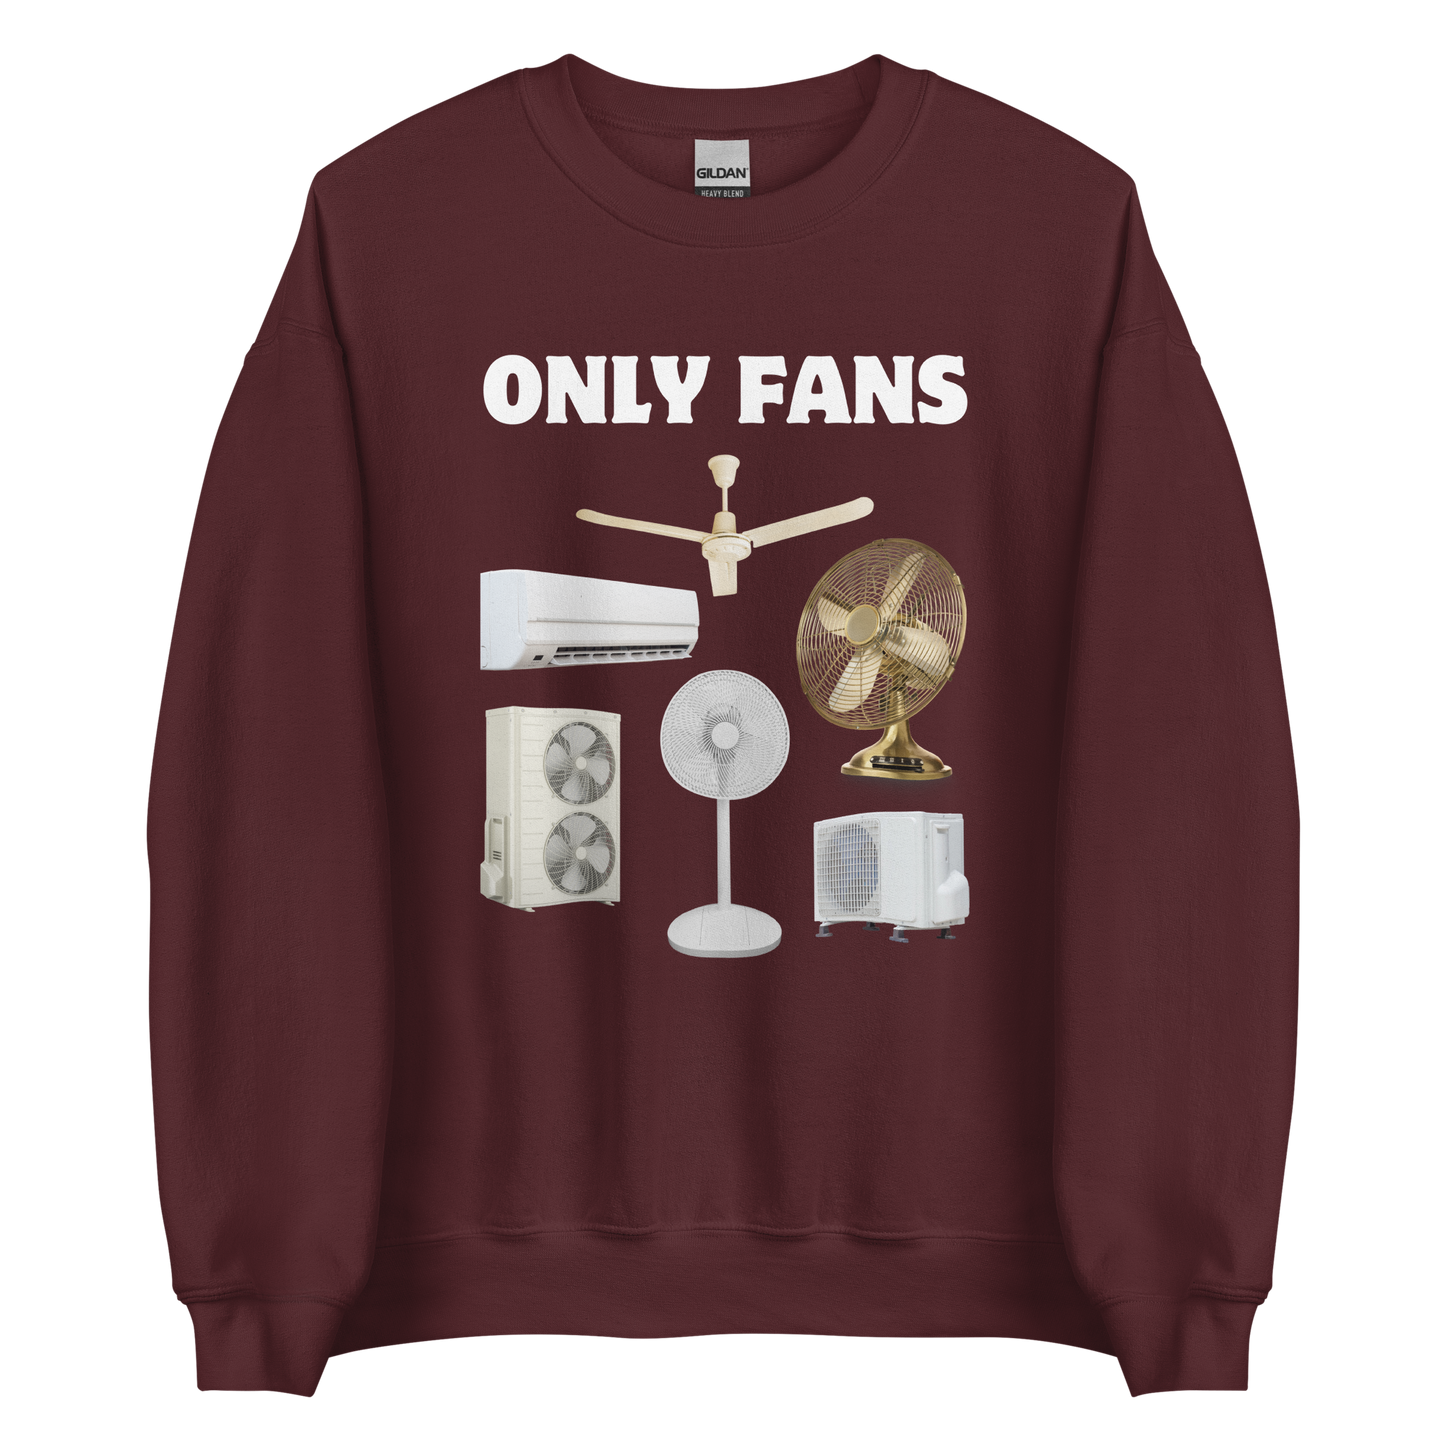 Maroon Only Fans Sweatshirt featuring a fun Fans graphic on the chest - Best Graphic Sweatshirts - Boozy Fox